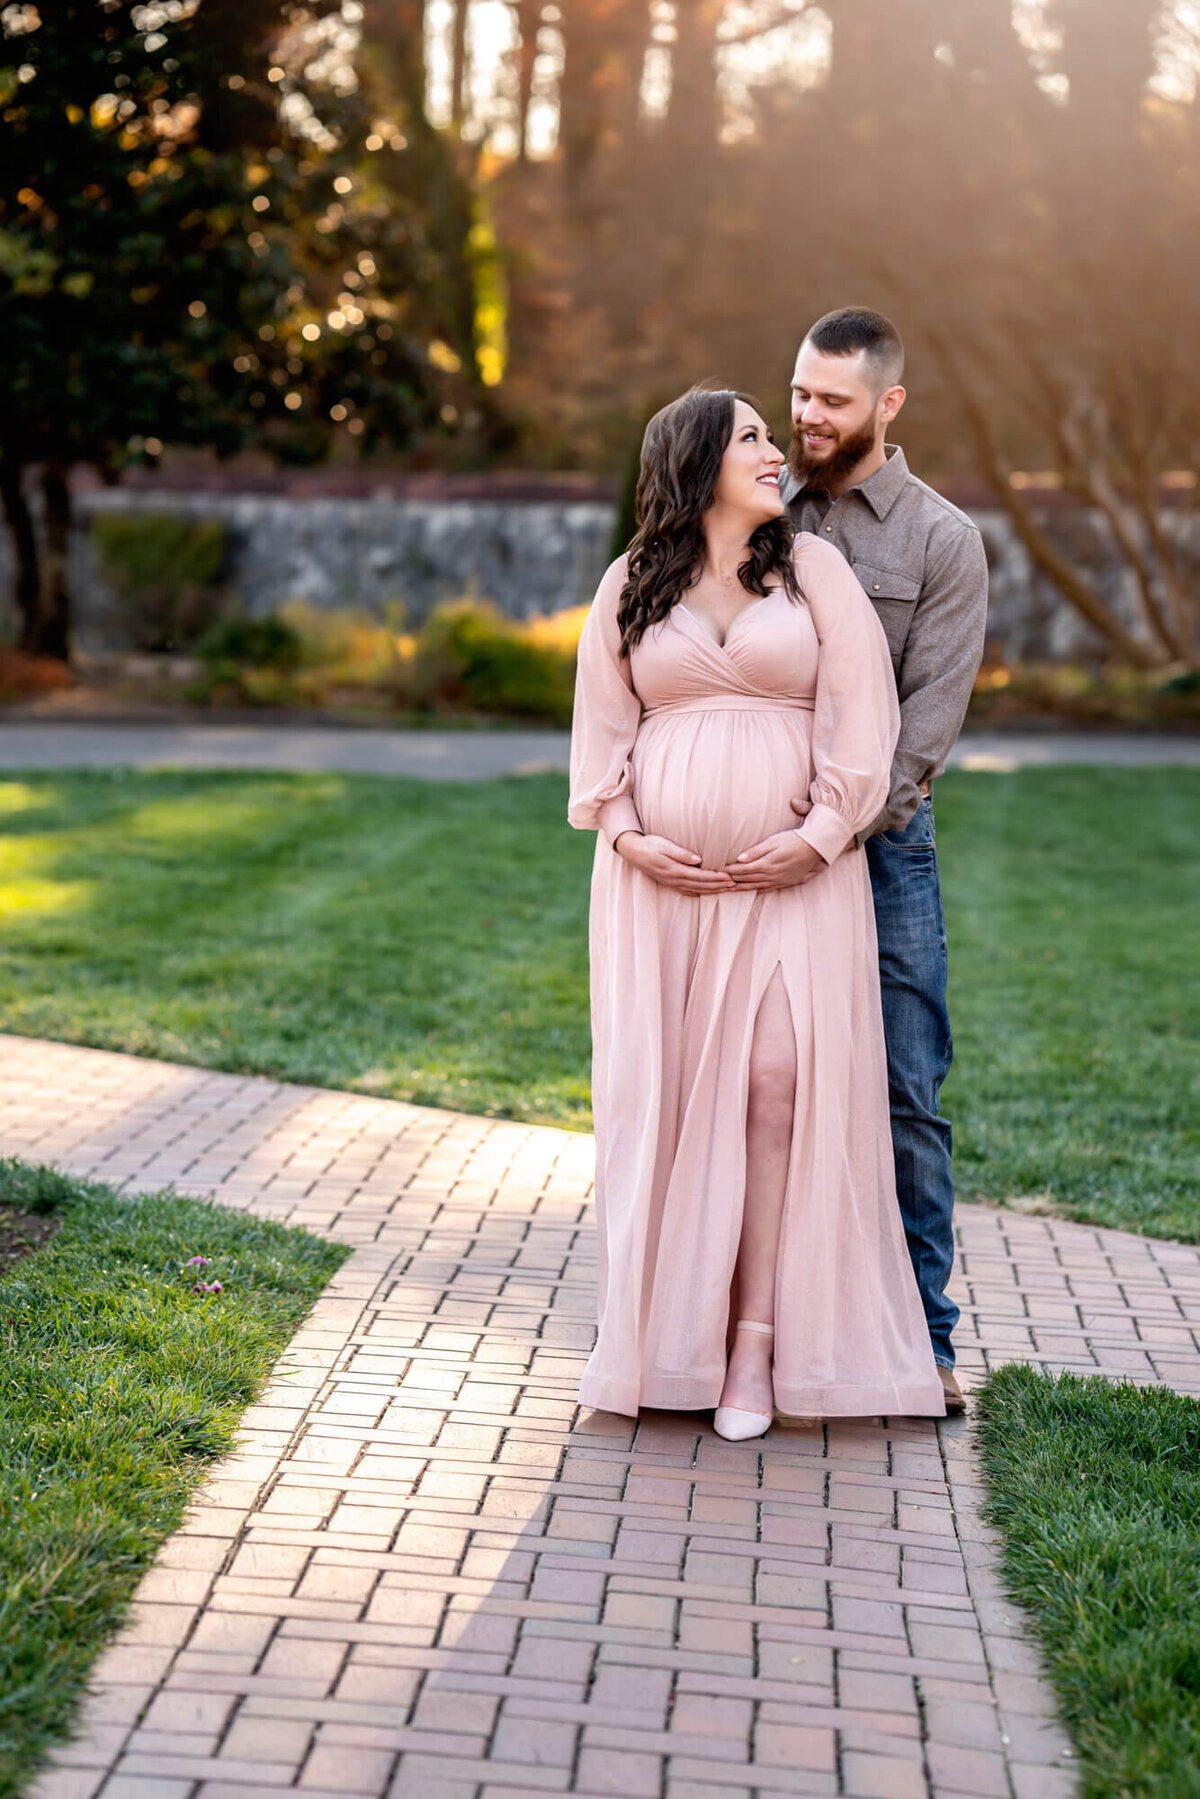 A mama to be in a long pink dress cradles her bump and smiles at her husband behind her